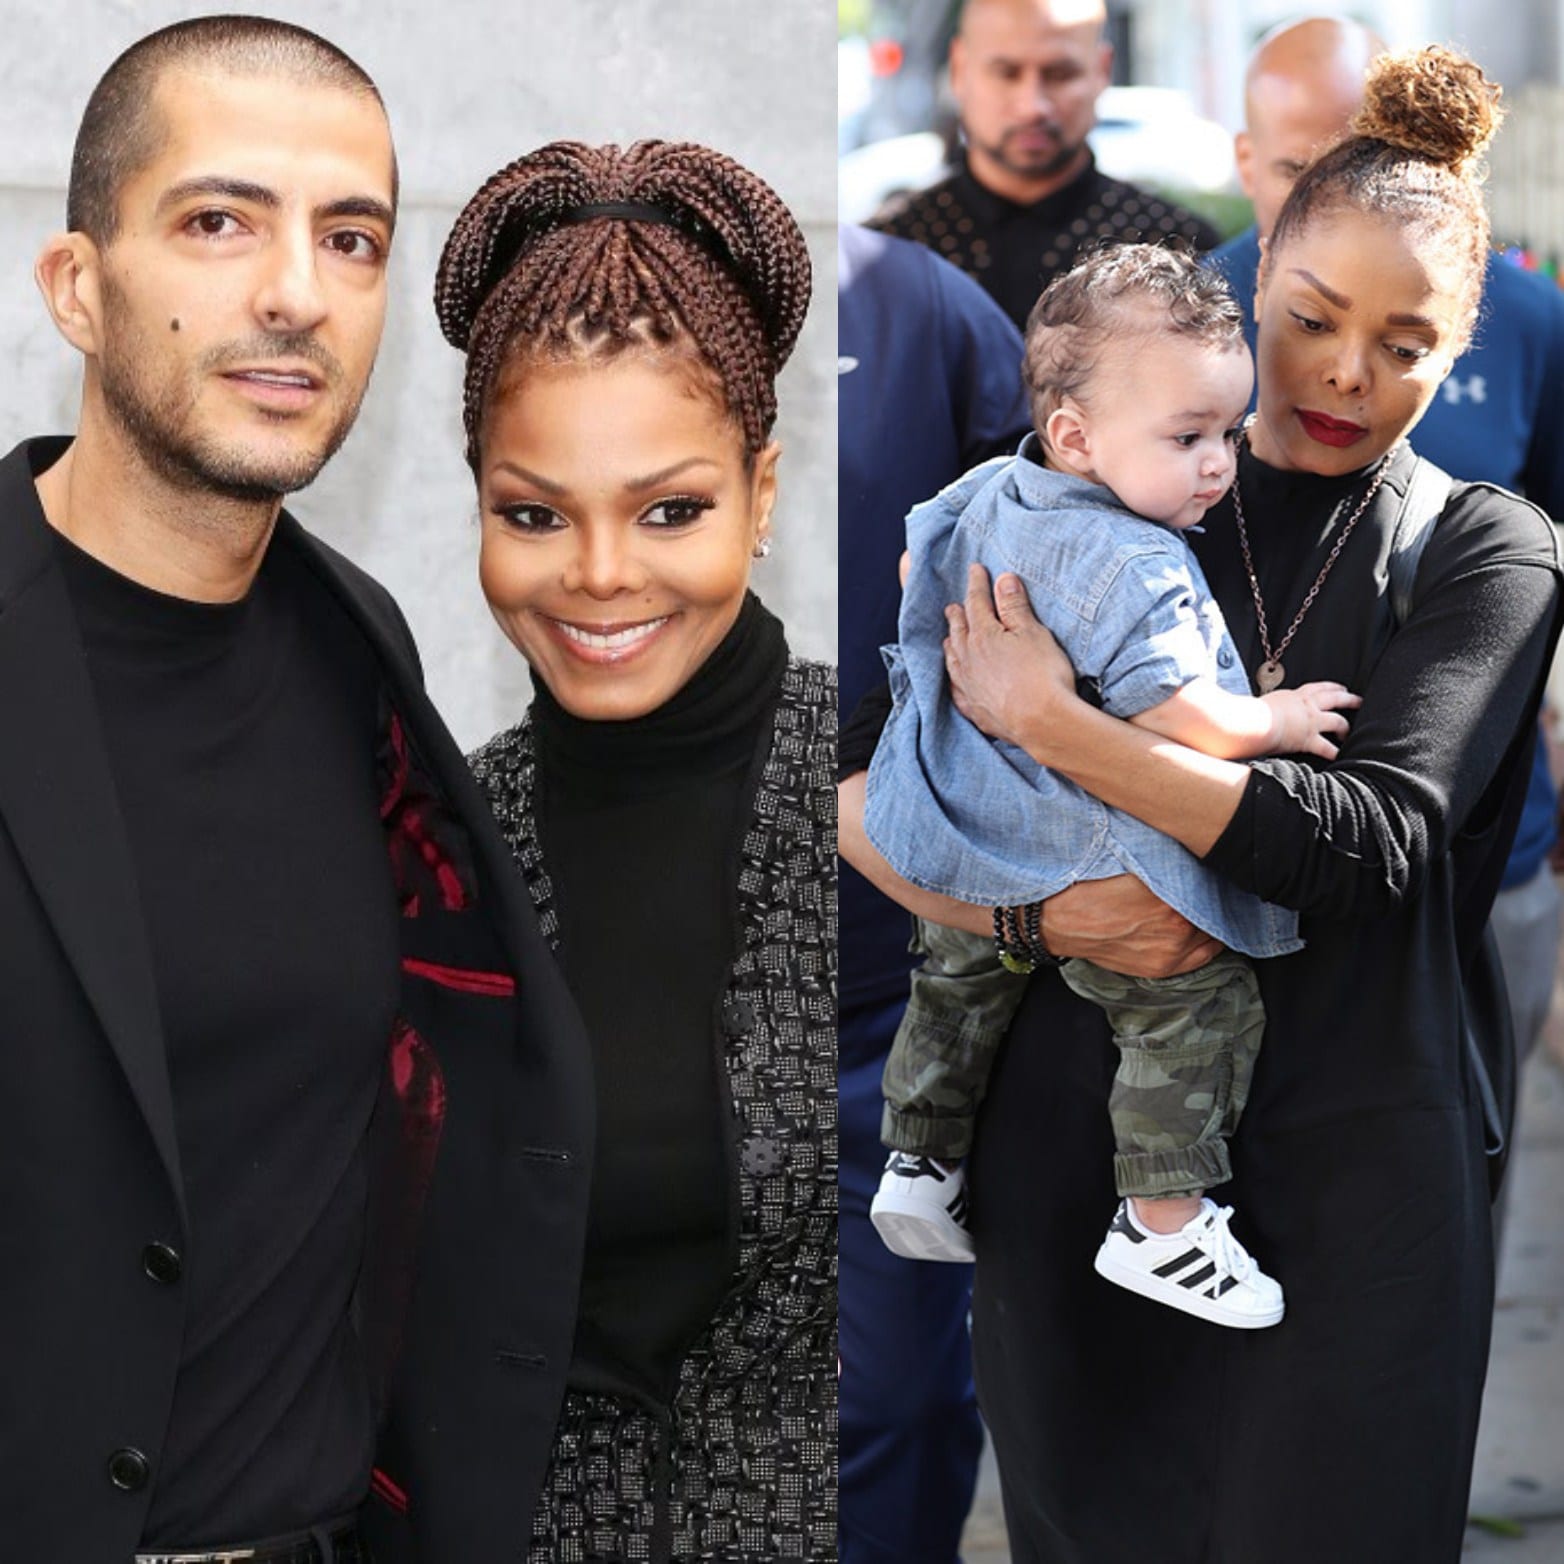 Janet Jackson Calls Police to Check on 1-Year-Old Son With Wissam Al Mana